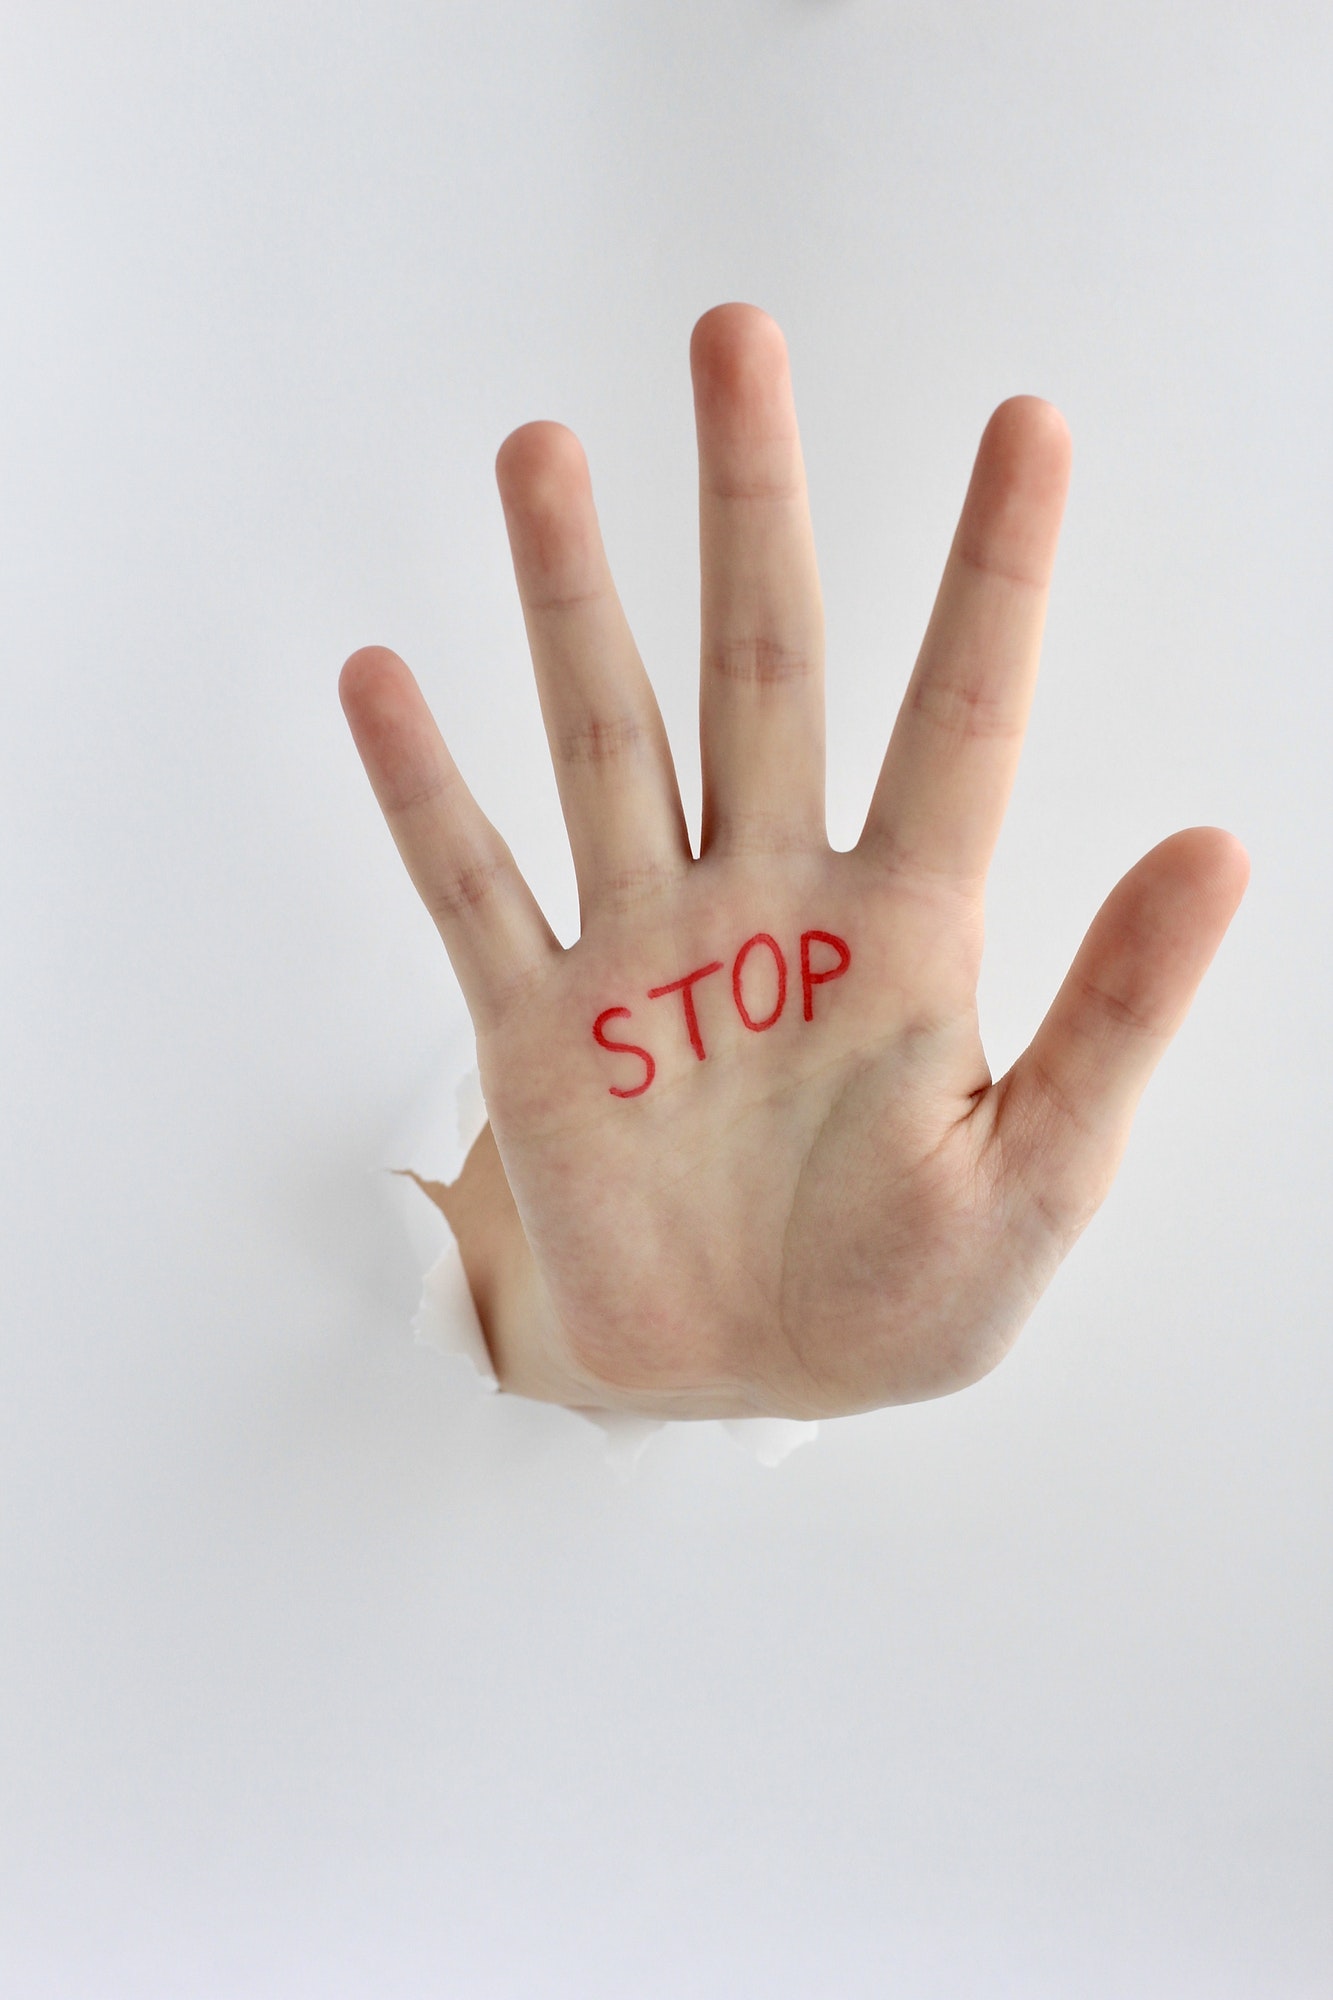 Hand with text stop written on the palm showing stop gesture through a hole in paper.